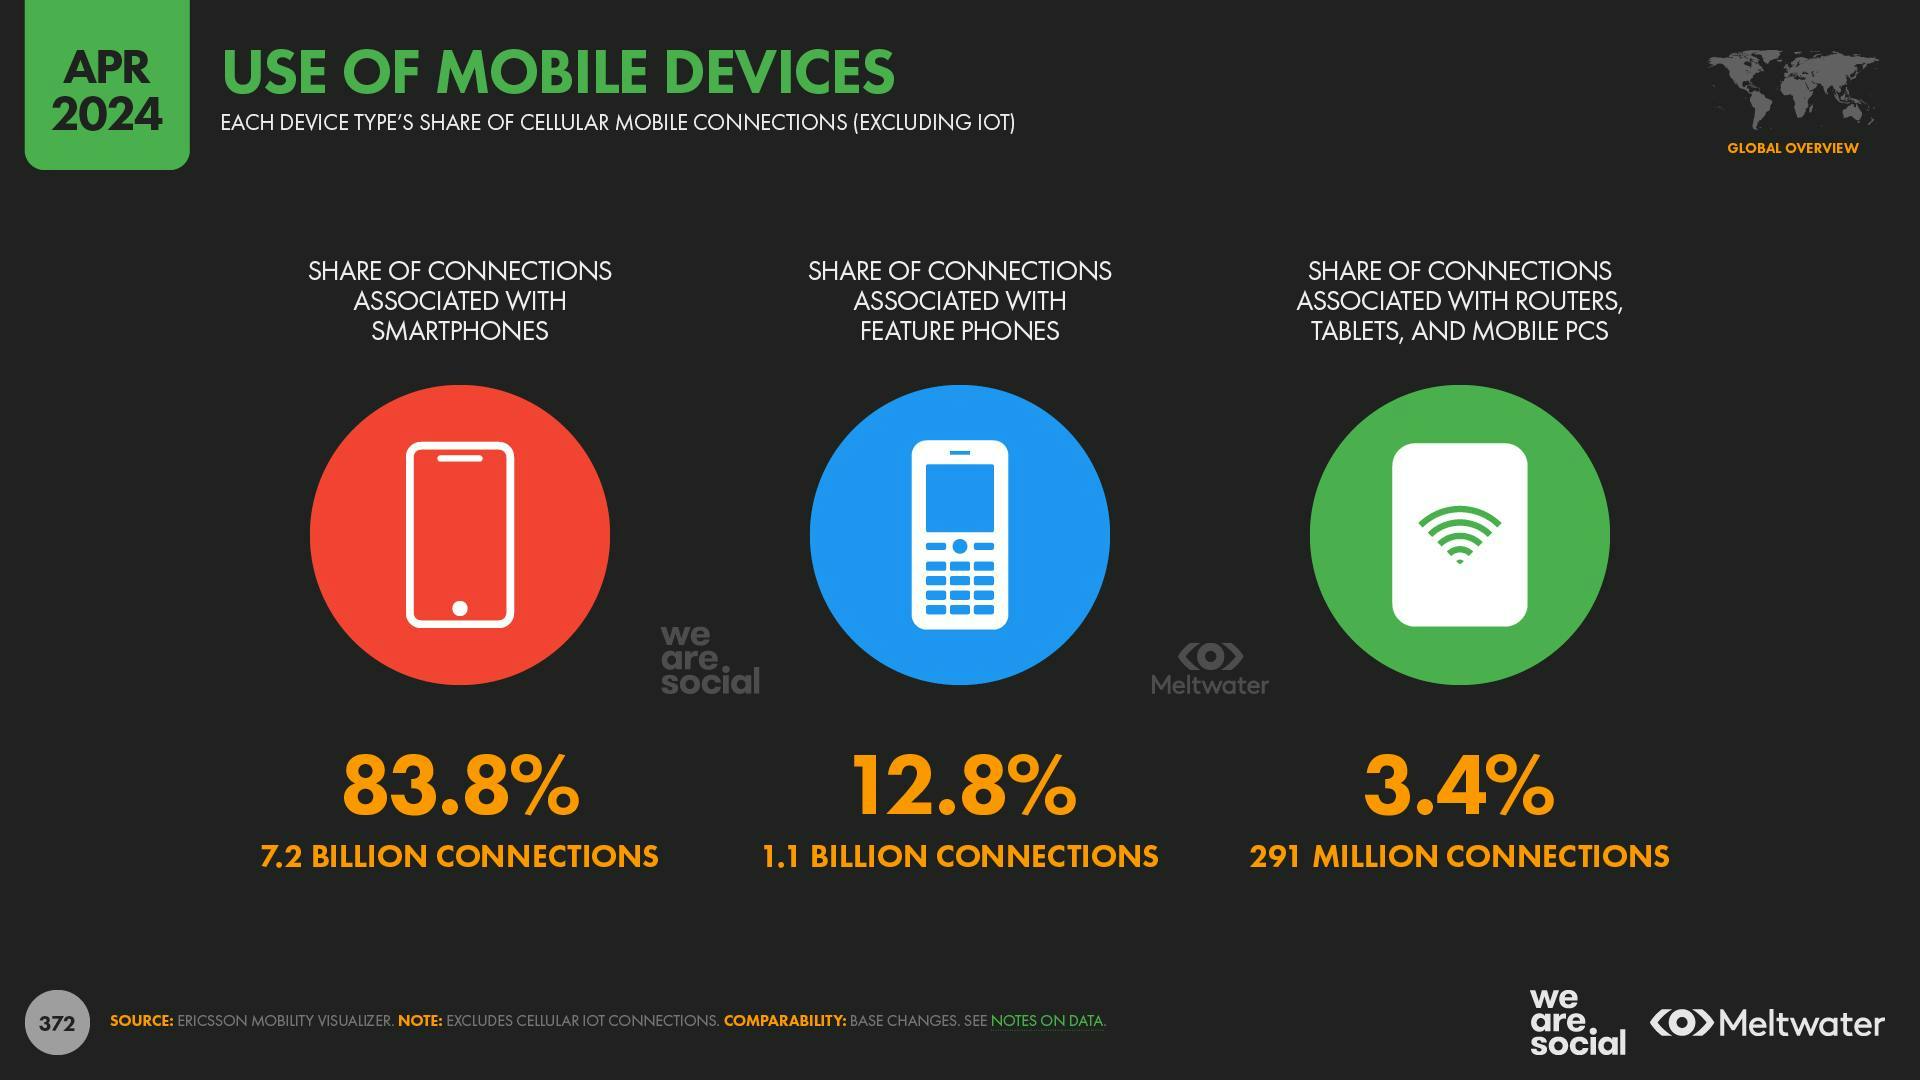 Use of mobile devices